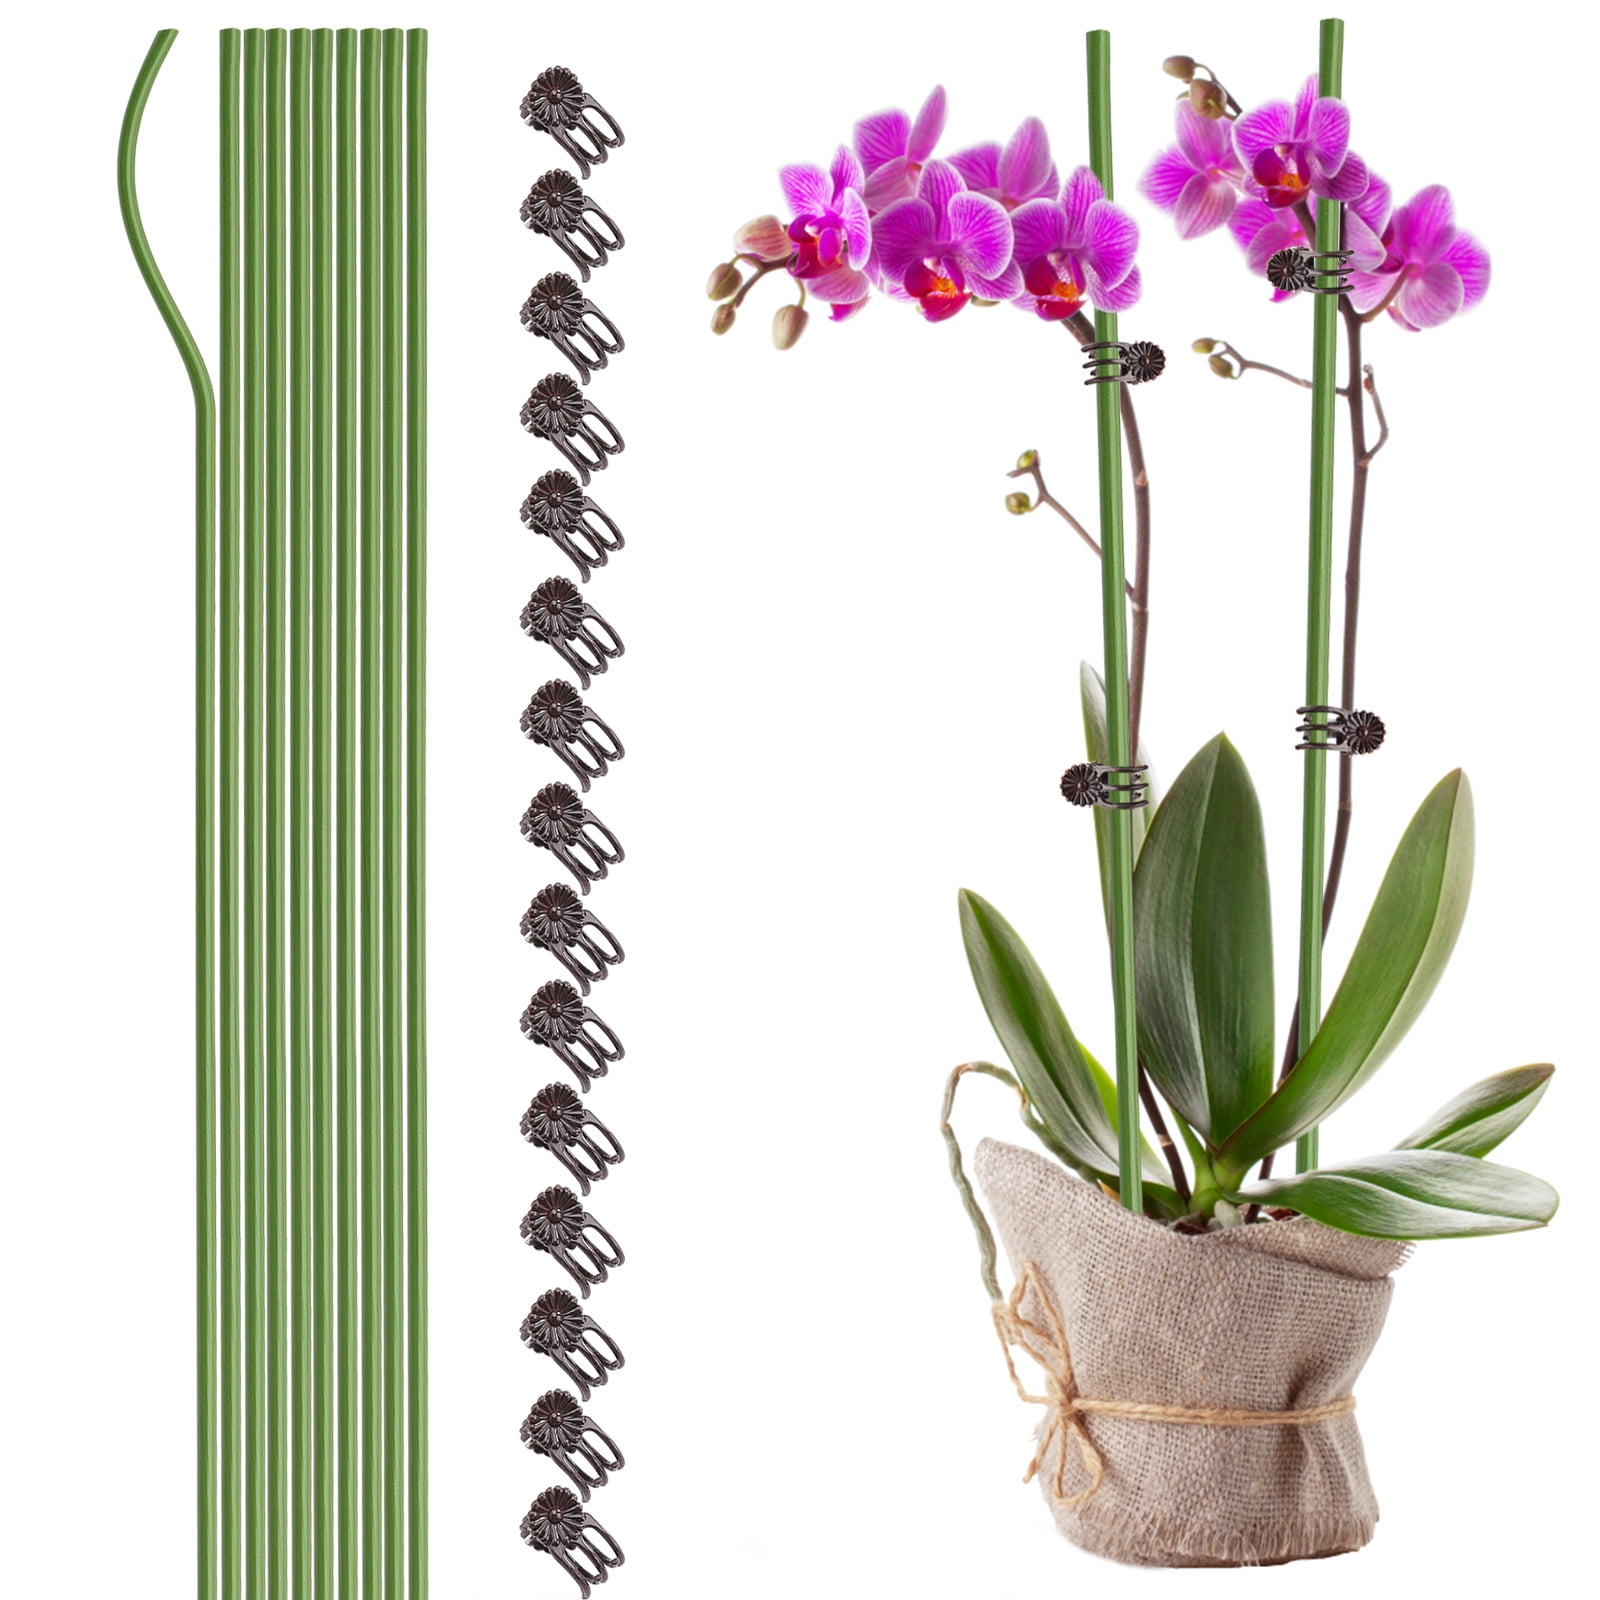 Orchid Flower Stakes Brown EESC2Y 10-PCs 15-3/4 Bendable Plastic Coated Metal Steel Garden Plant Support Stakes Sticks for Potted House Plants Indoor 